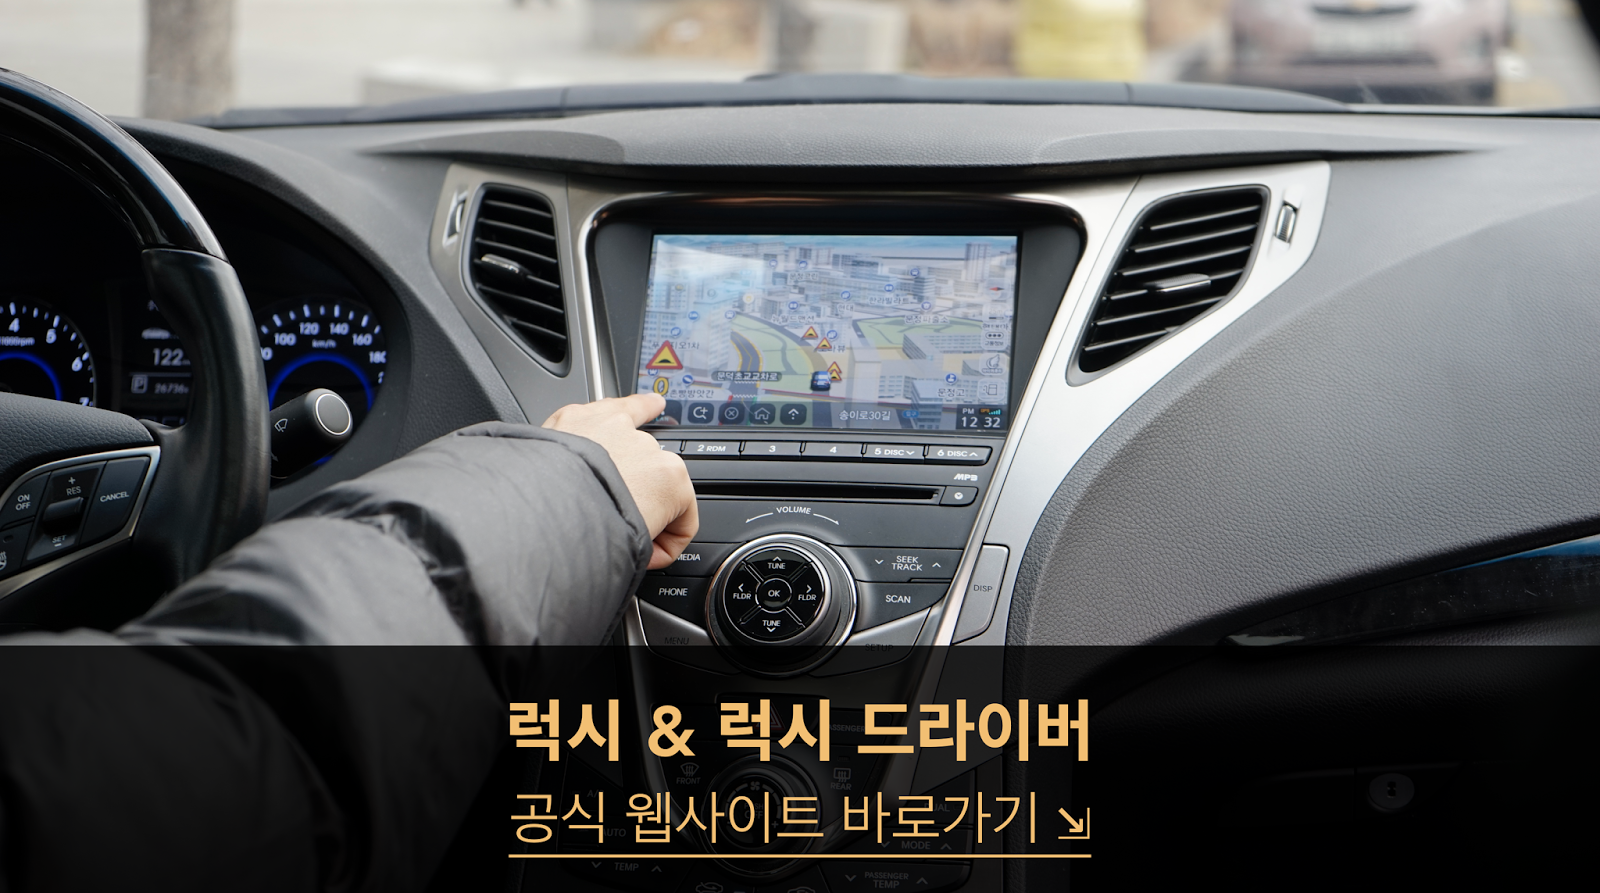 http://www.luxicar.co.kr/home/luxi